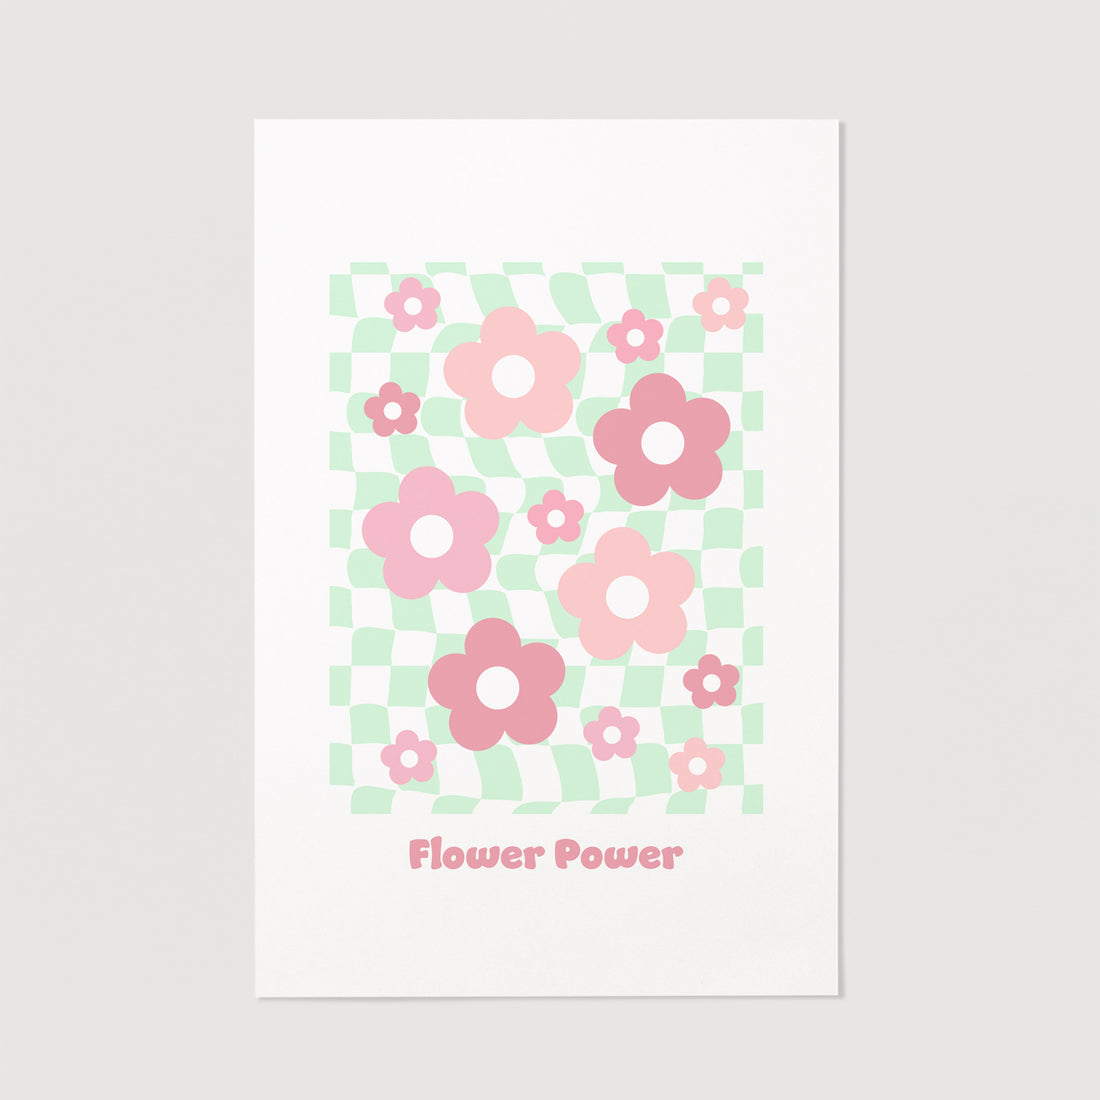 funky design art print with retro inspired flowers